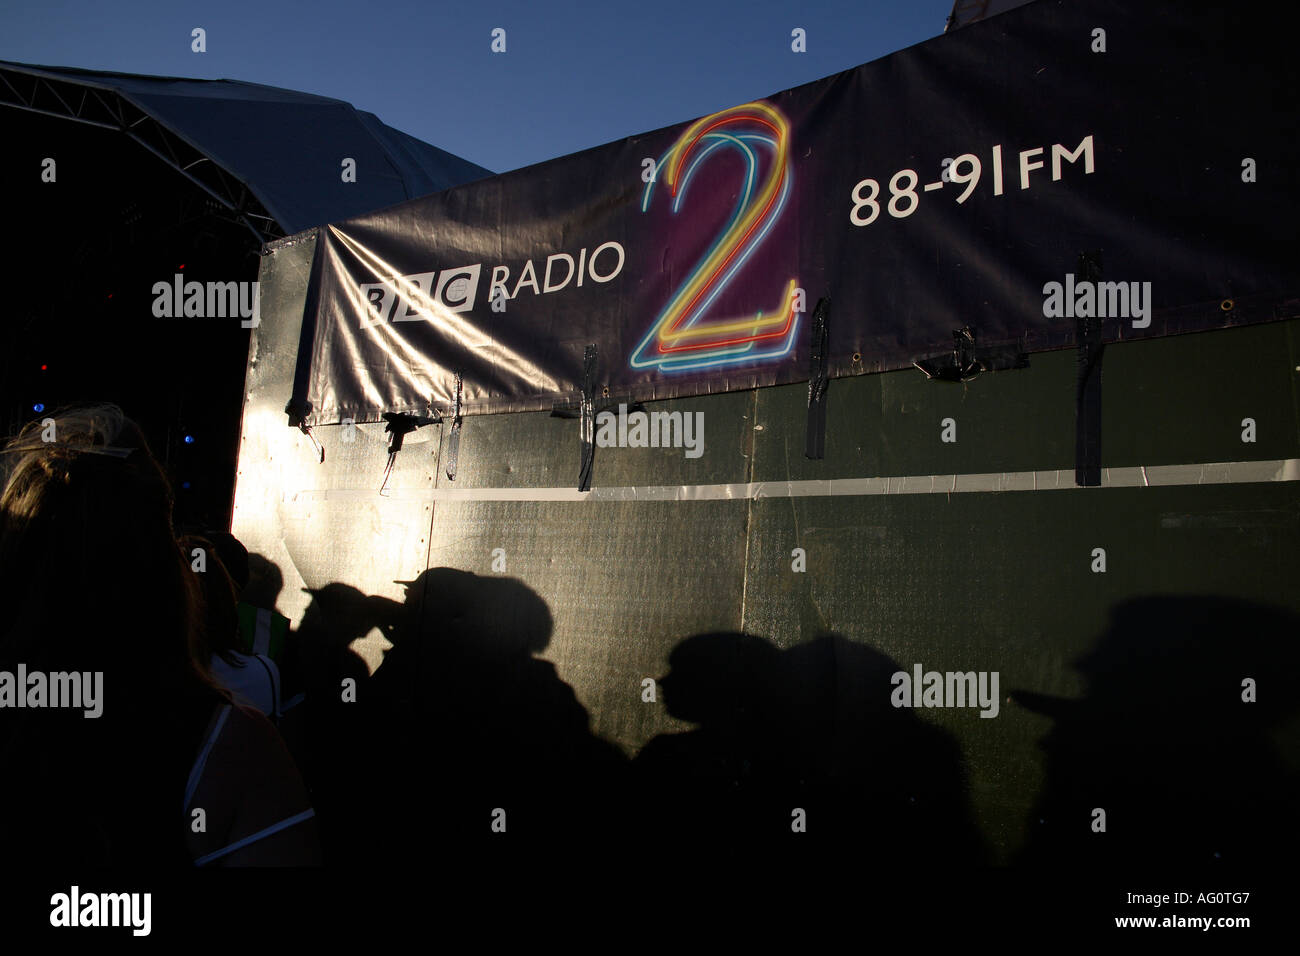 Shadows of audience at Guilfest Music Festival on  BBC Radio 2 banner. Guildford, Surrey, England Stock Photo